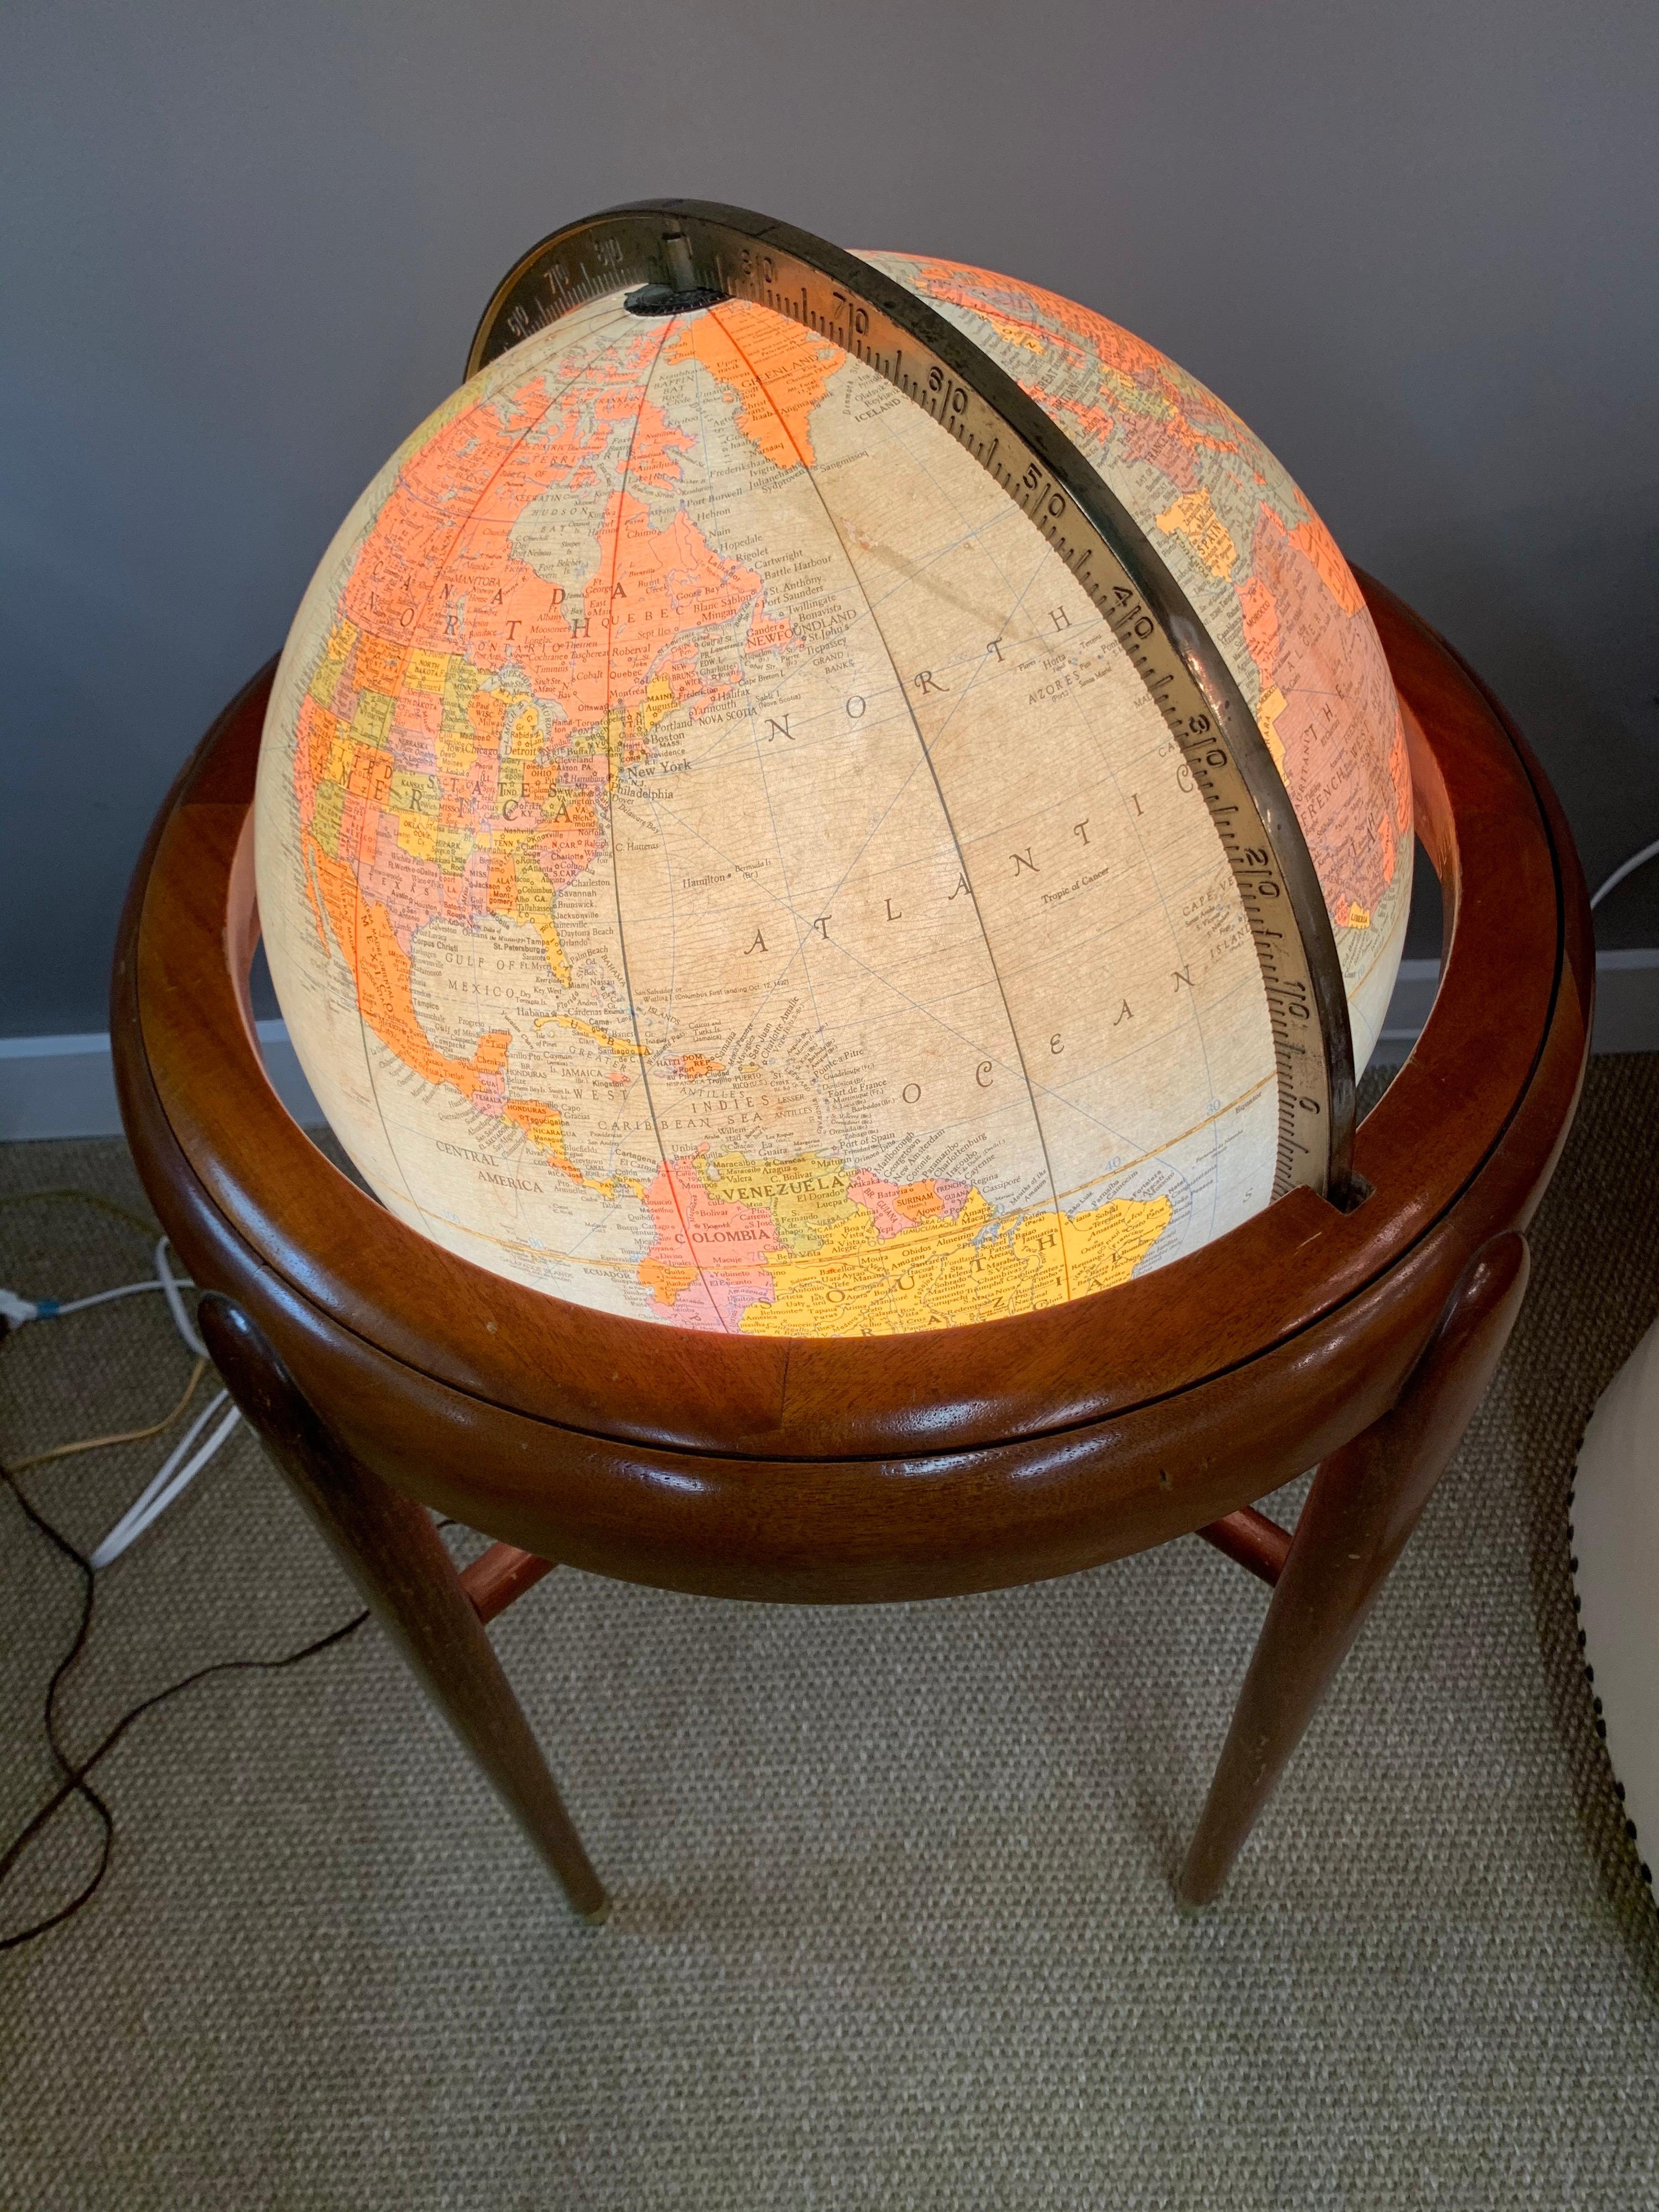 Rare to see a Mid-Century Modern globe both illuminated and with that iconic Danish modern look which is so coveted. Everything works as it should. Just gorgeous.